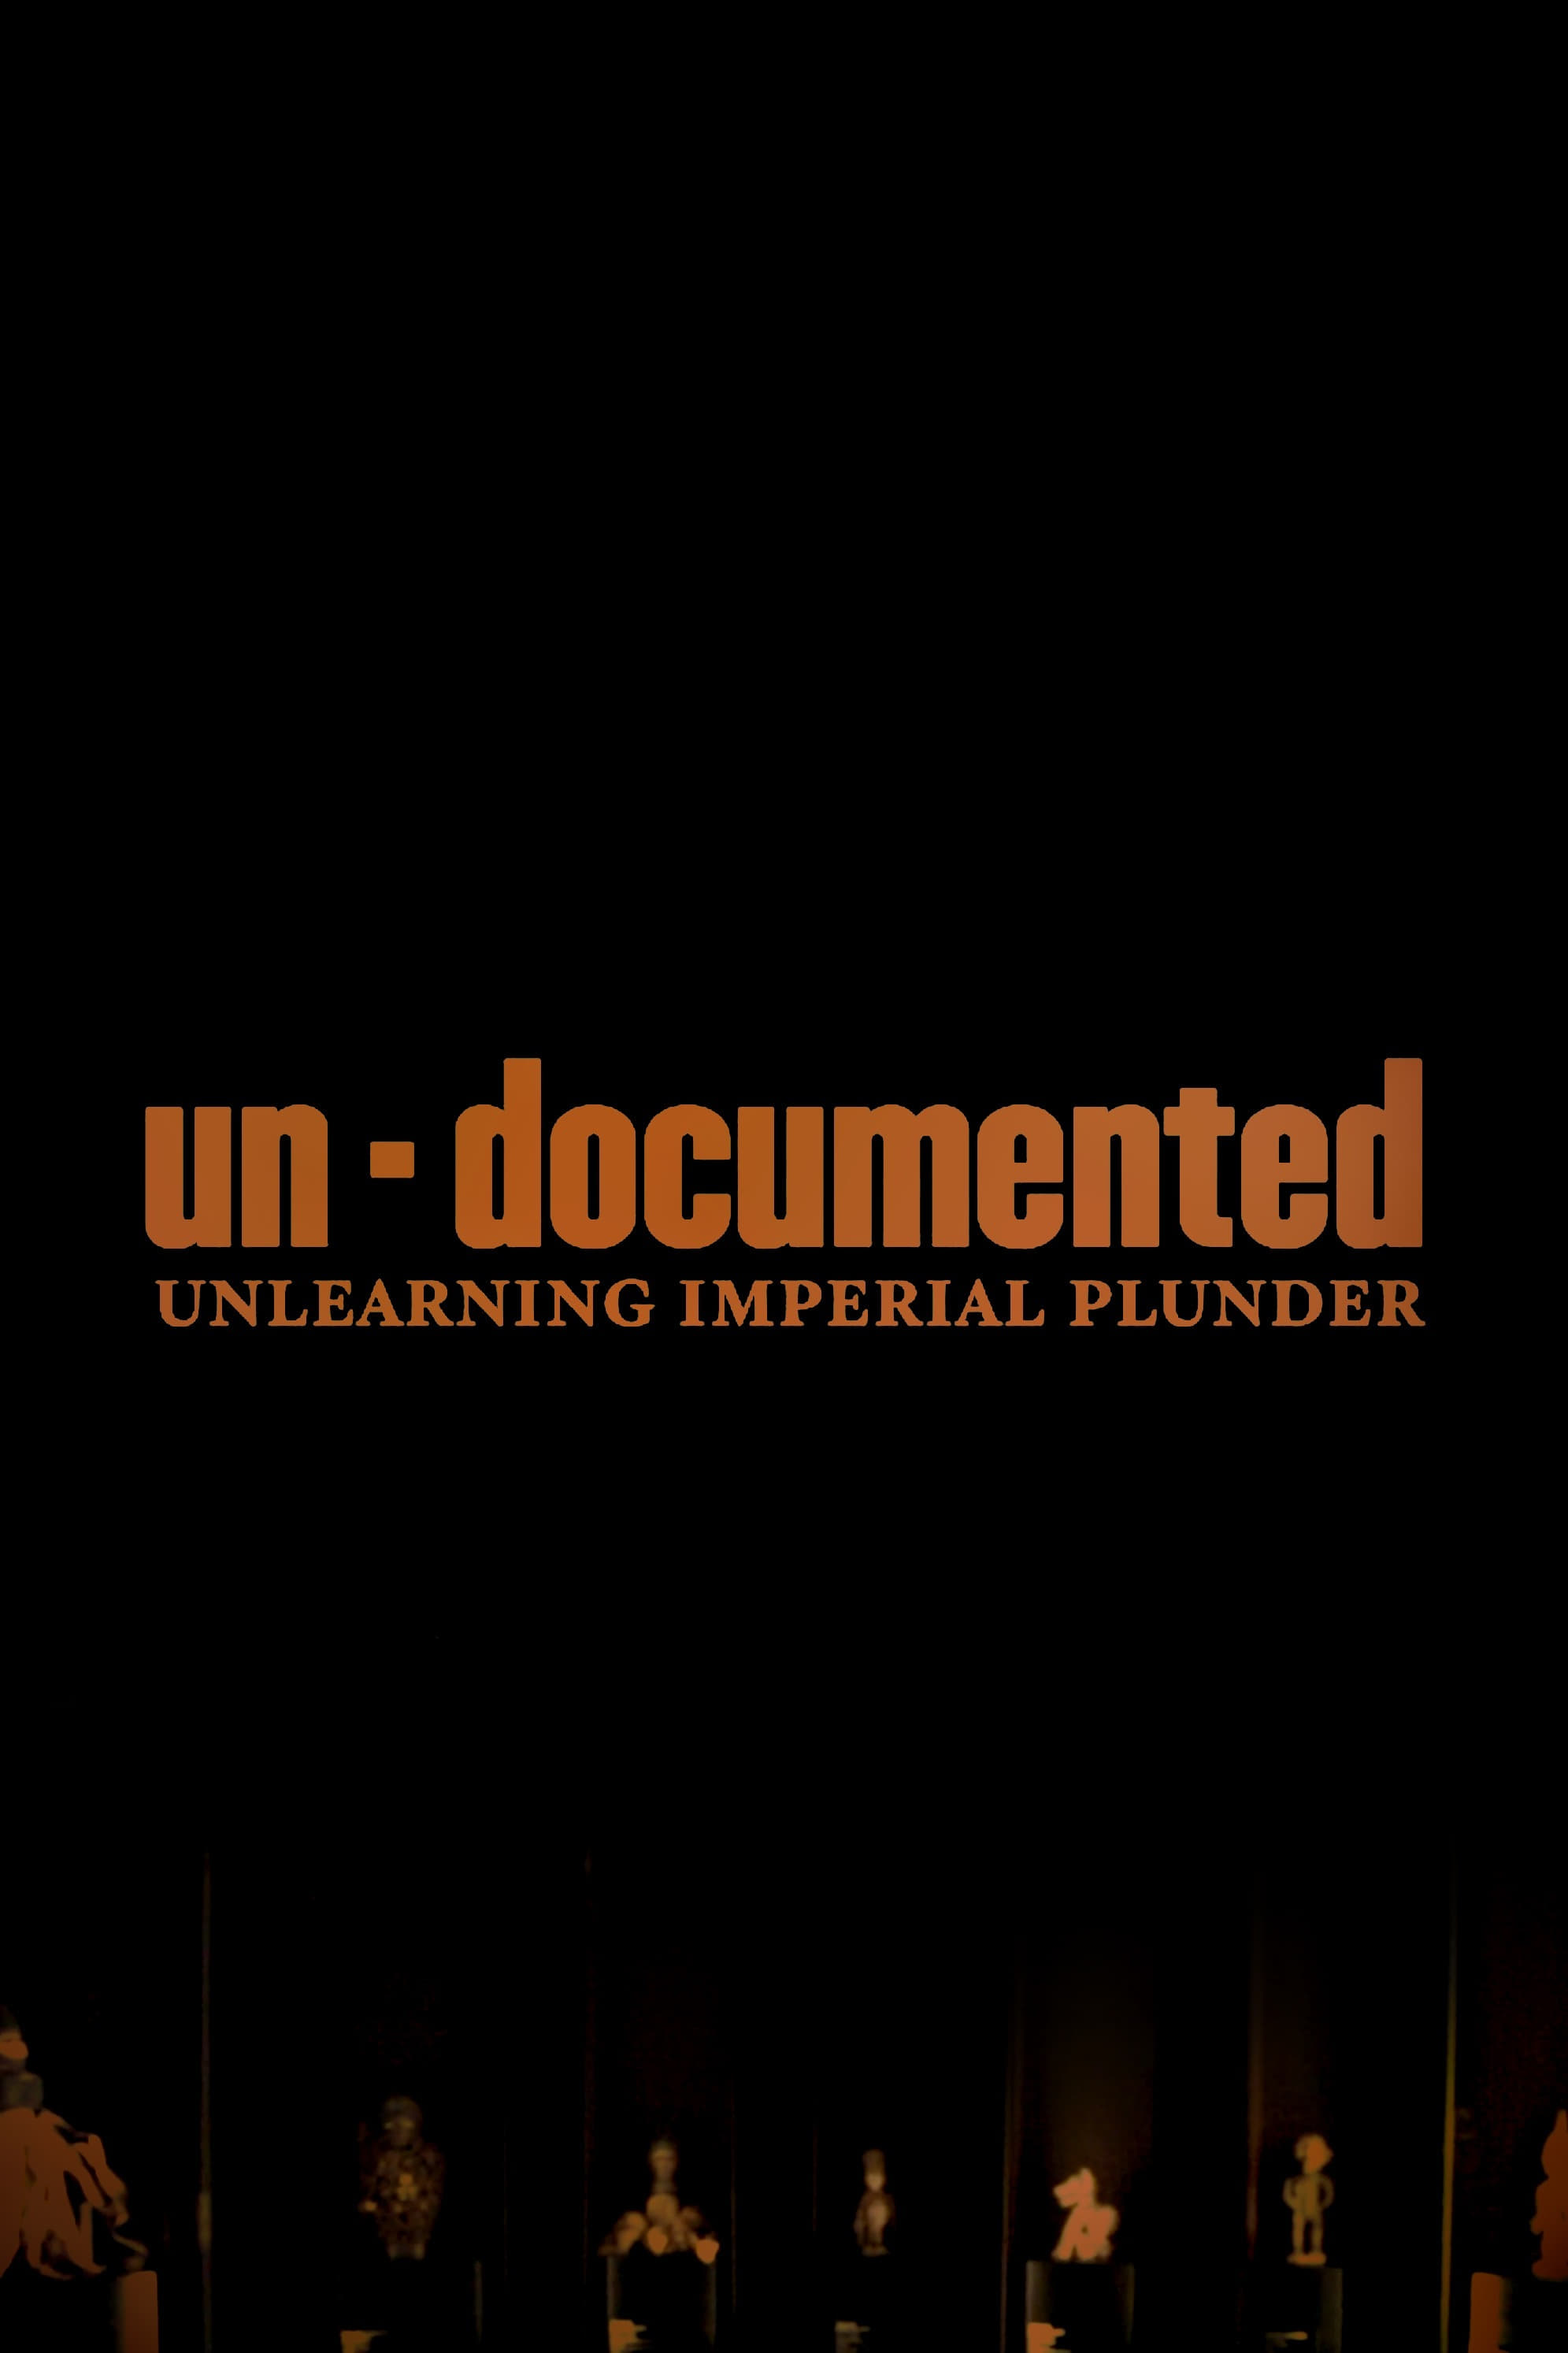 Un-Documented: Unlearning Imperial Plunder